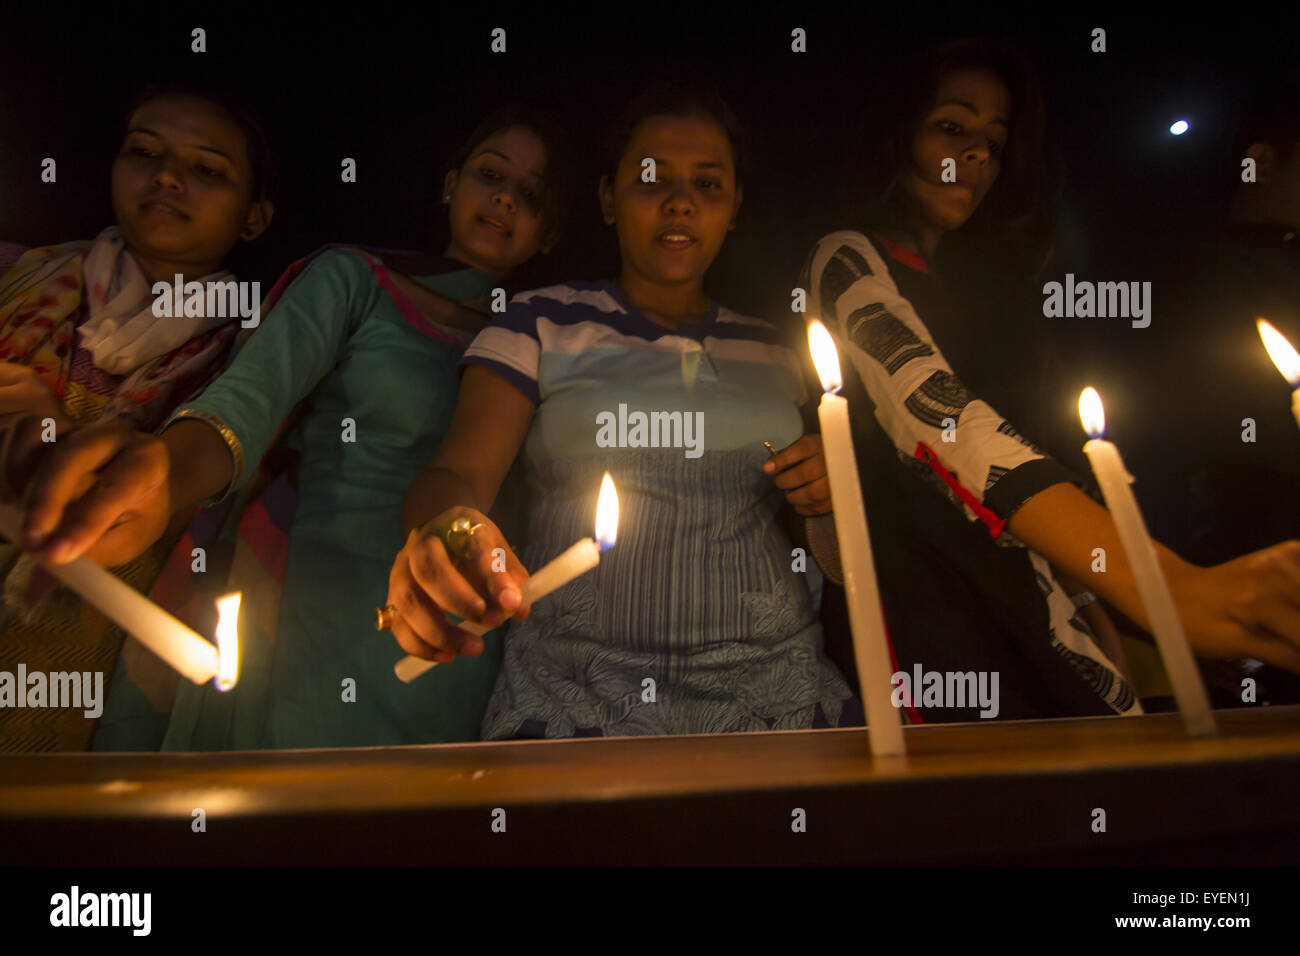 Sivasagar, Assam, India. 28th July, 2015. Indian girls light candles to pay homage to former President of India APJ Abdul Kalam in Sivasagar in northeastern Assam state on July 28, 2015. India's former president and top scientist A. P. J. Kalam, who played a lead role in the country's nuclear weapons tests, died on July 27, a hospital official said. He was 83. Kalam collapsed during a lecture at a management institute in the northeastern Indian city of Shillong, and was declared dead on arrival by doctors at Bethany hospital. © Luit Chaliha/ZUMA Wire/Alamy Live News Stock Photo